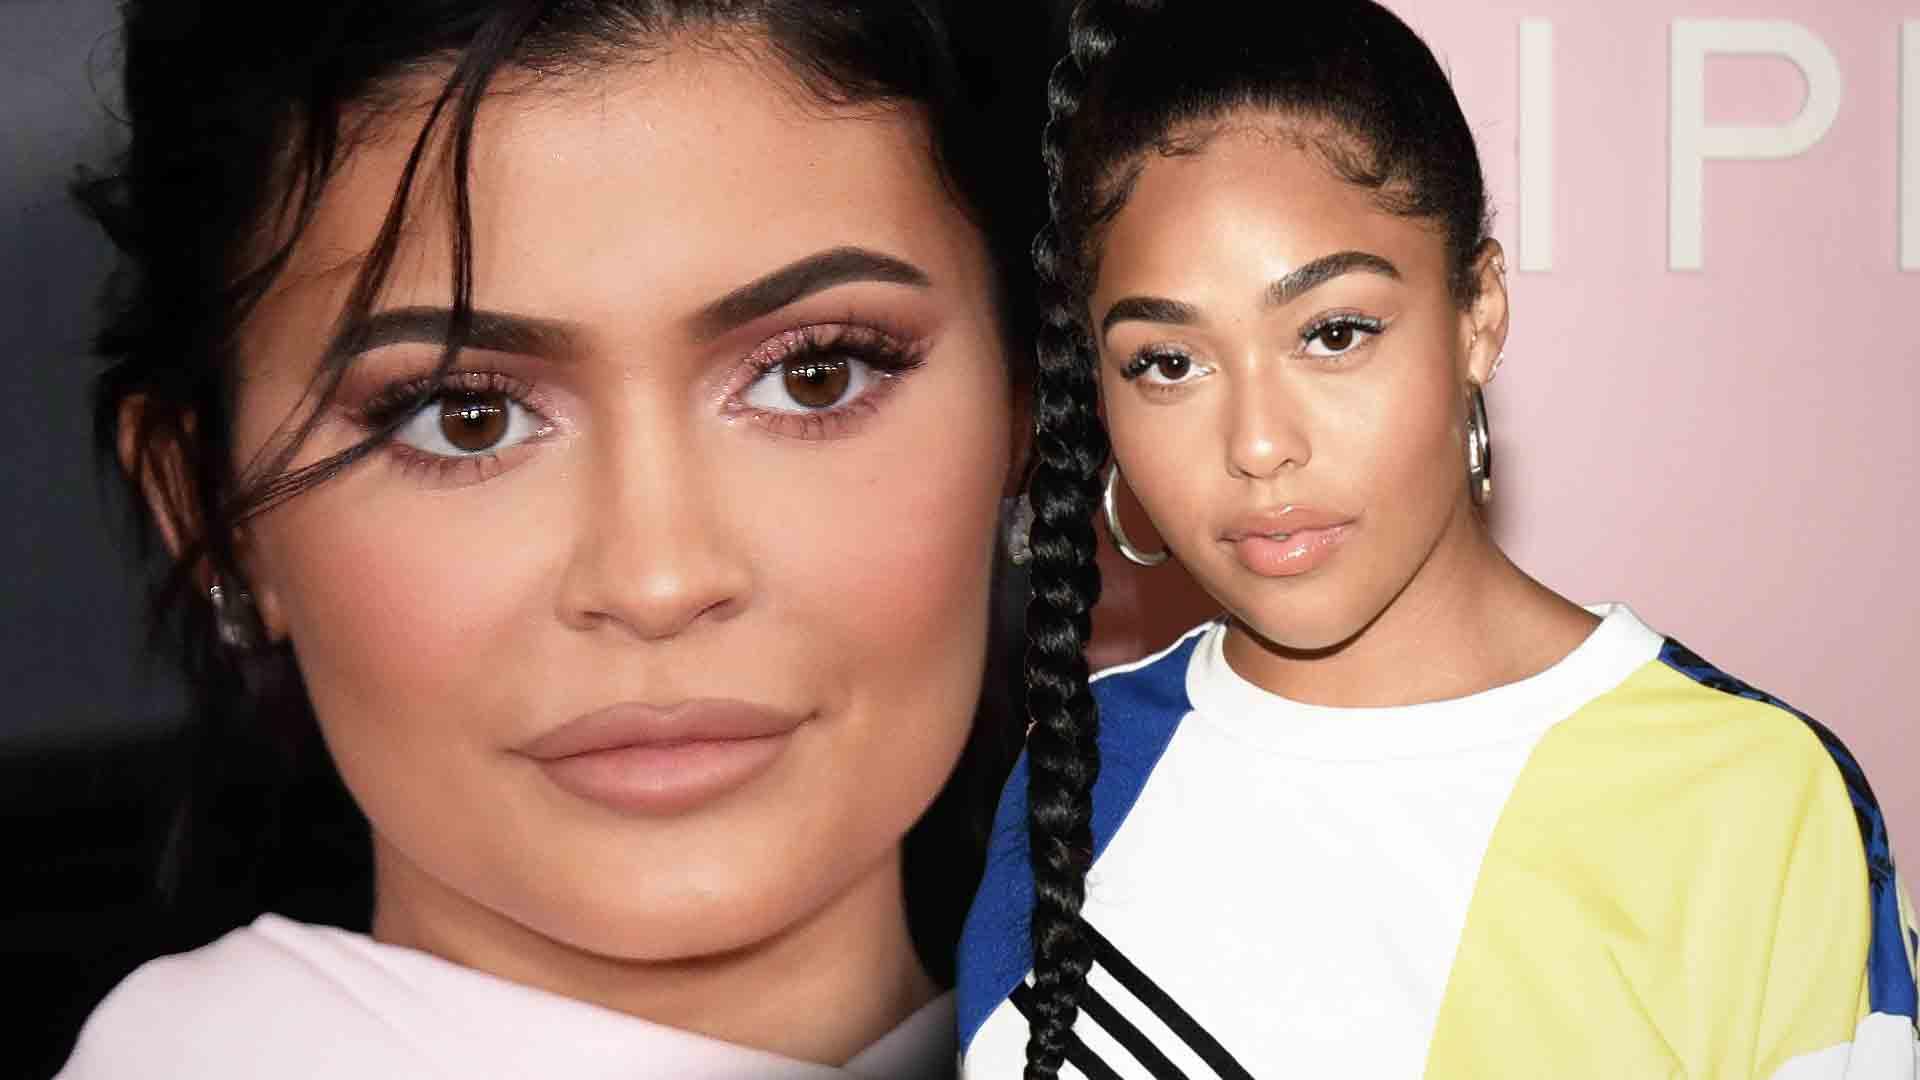 Kylie Jenner Will Distance Herself from Jordyn Woods In ‘Her Own Time’